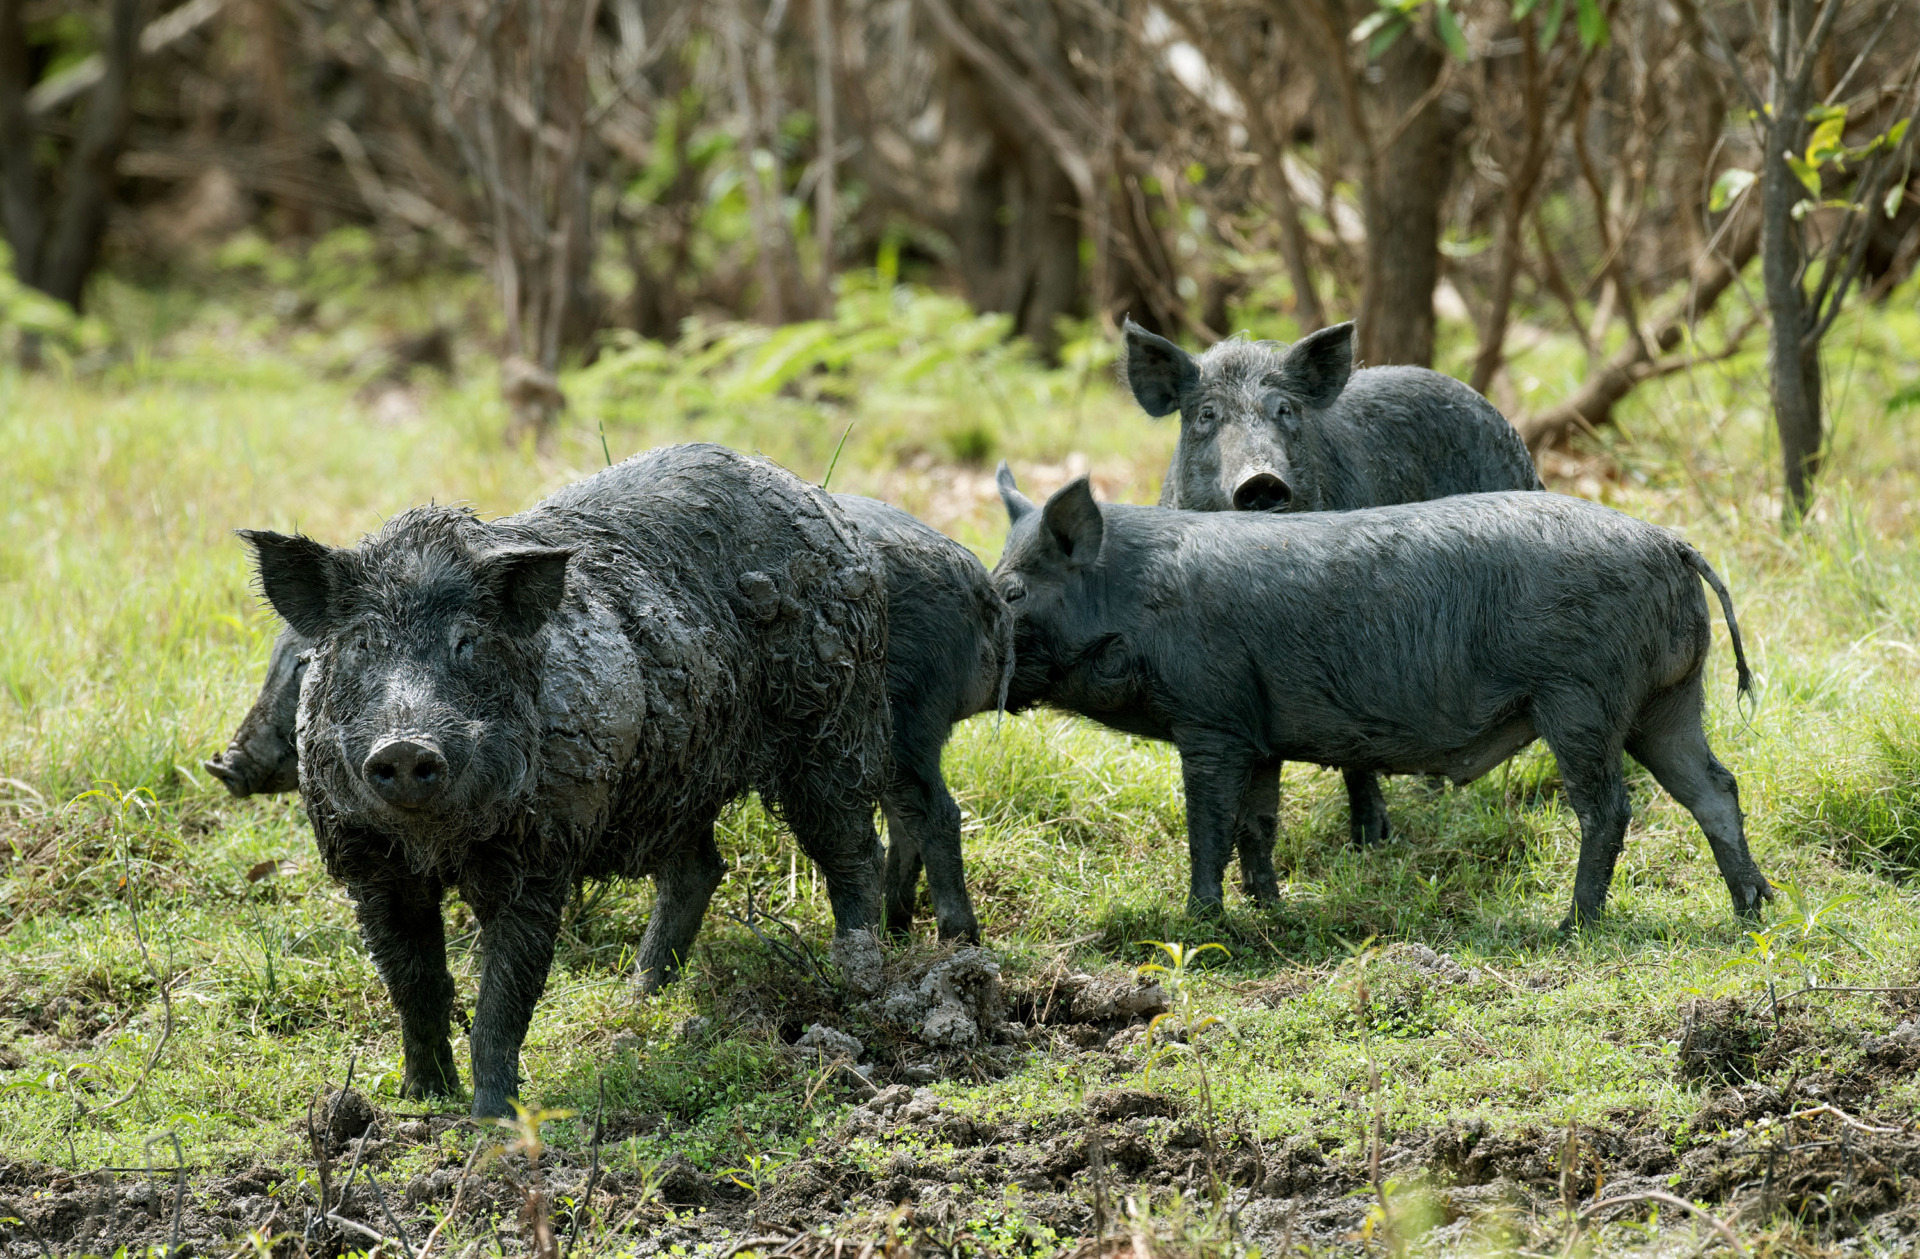 Texas A&M AgriLife Extension Service study shows toxicant effective tool to reduce feral hog populations